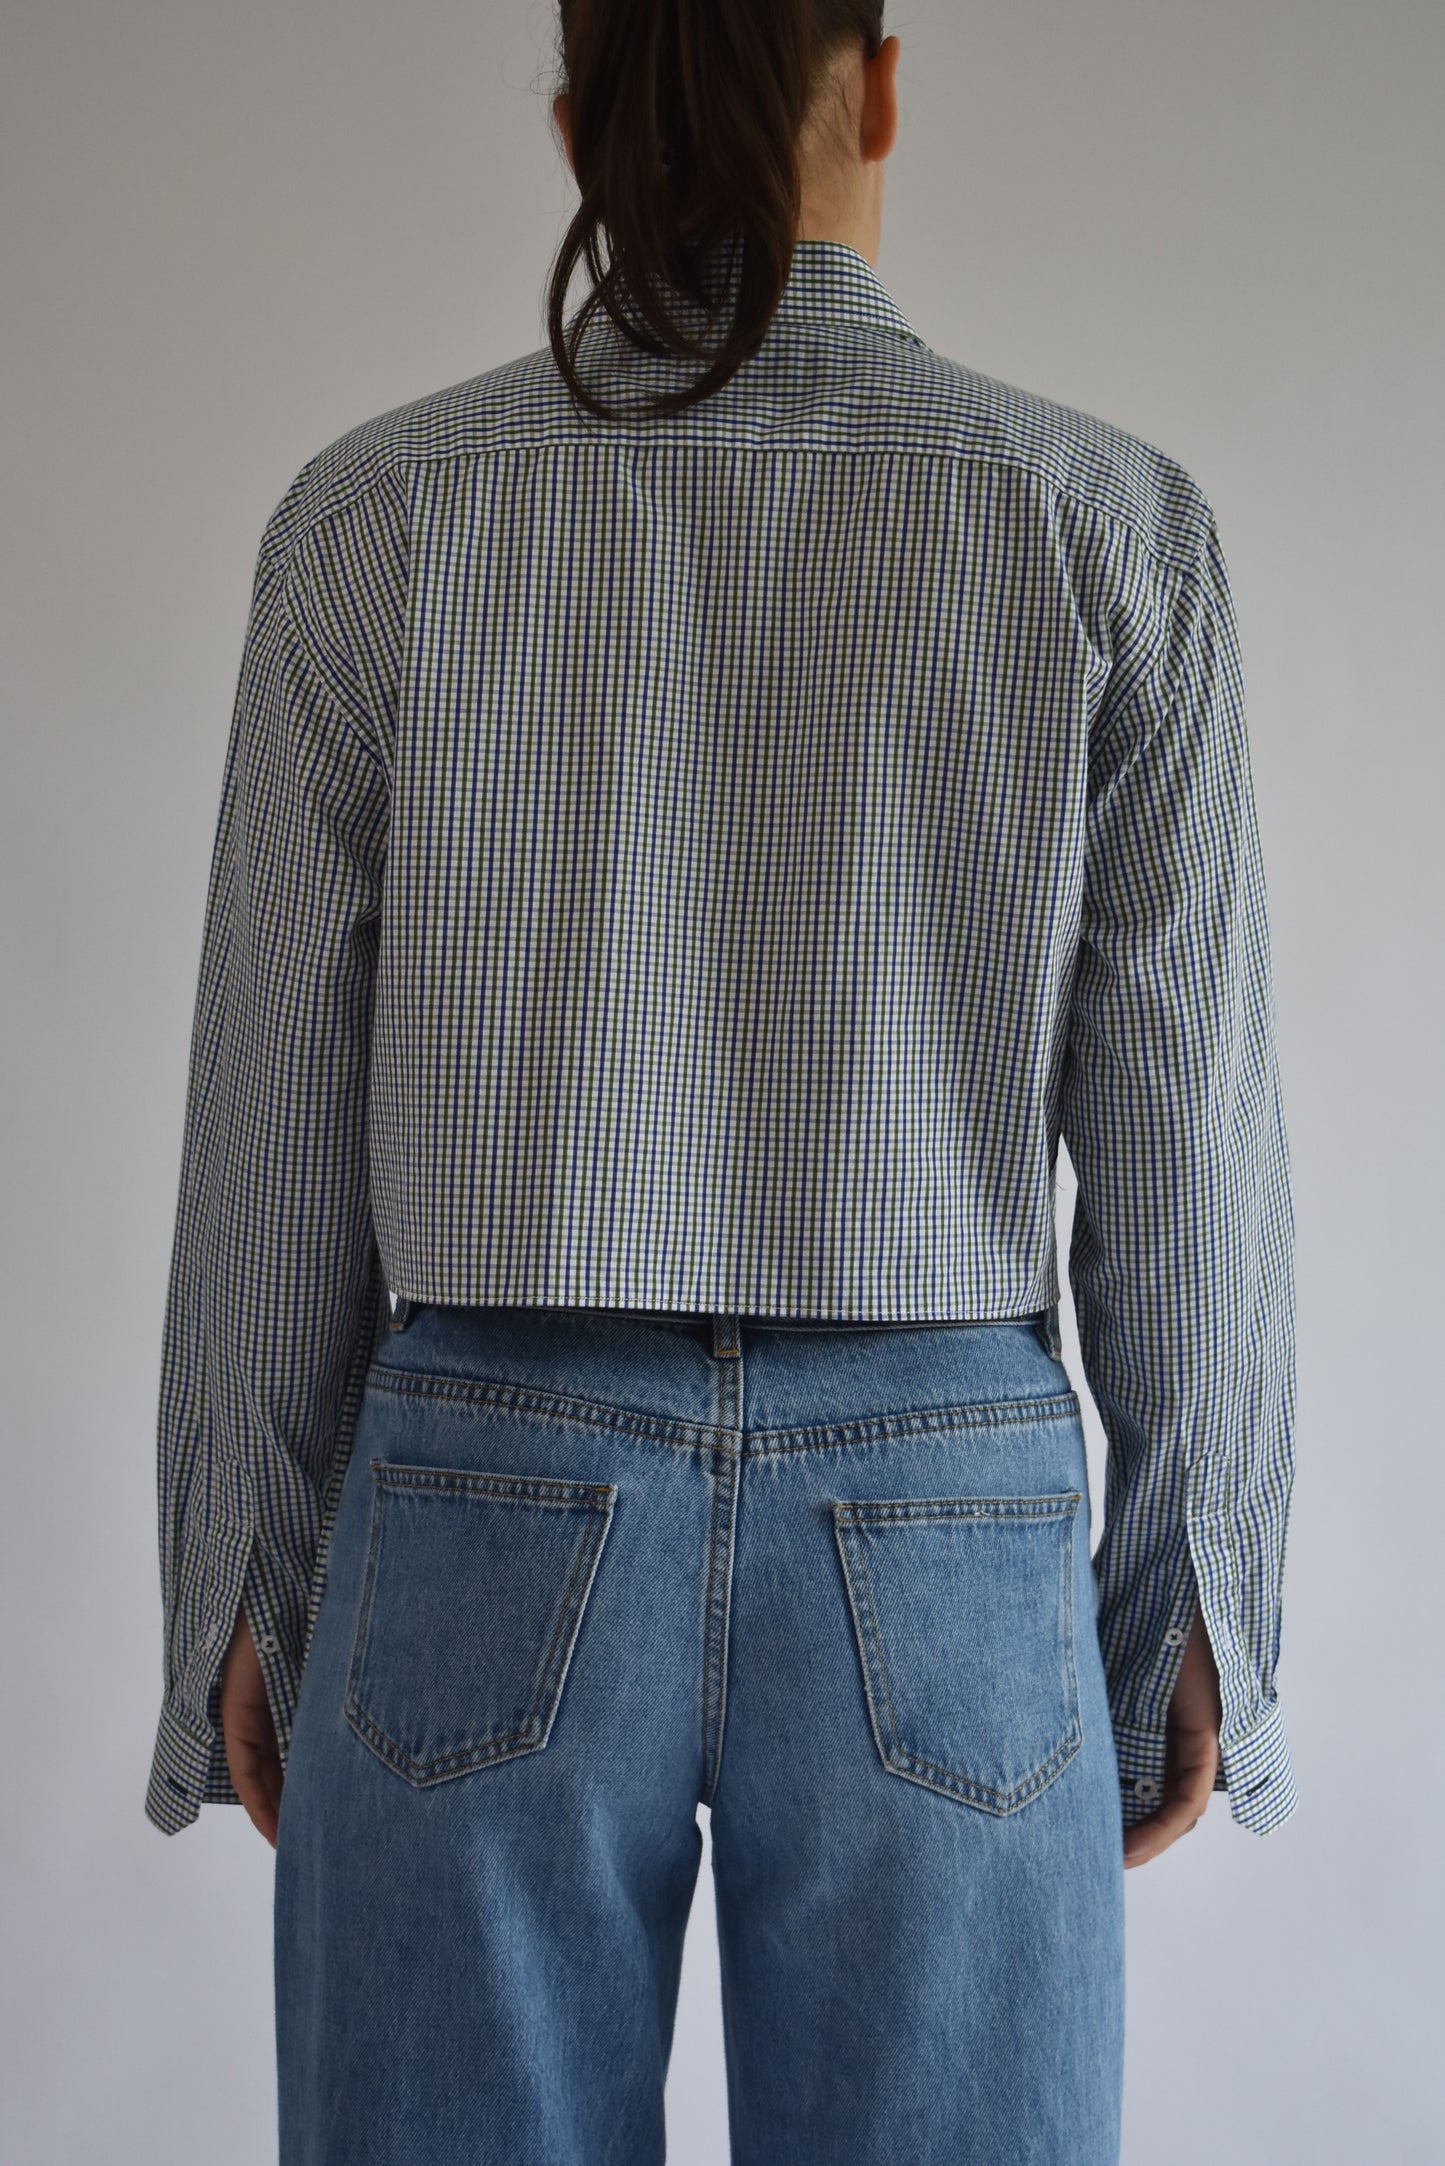 Collared Tie Shirt - Blue Check // AM079